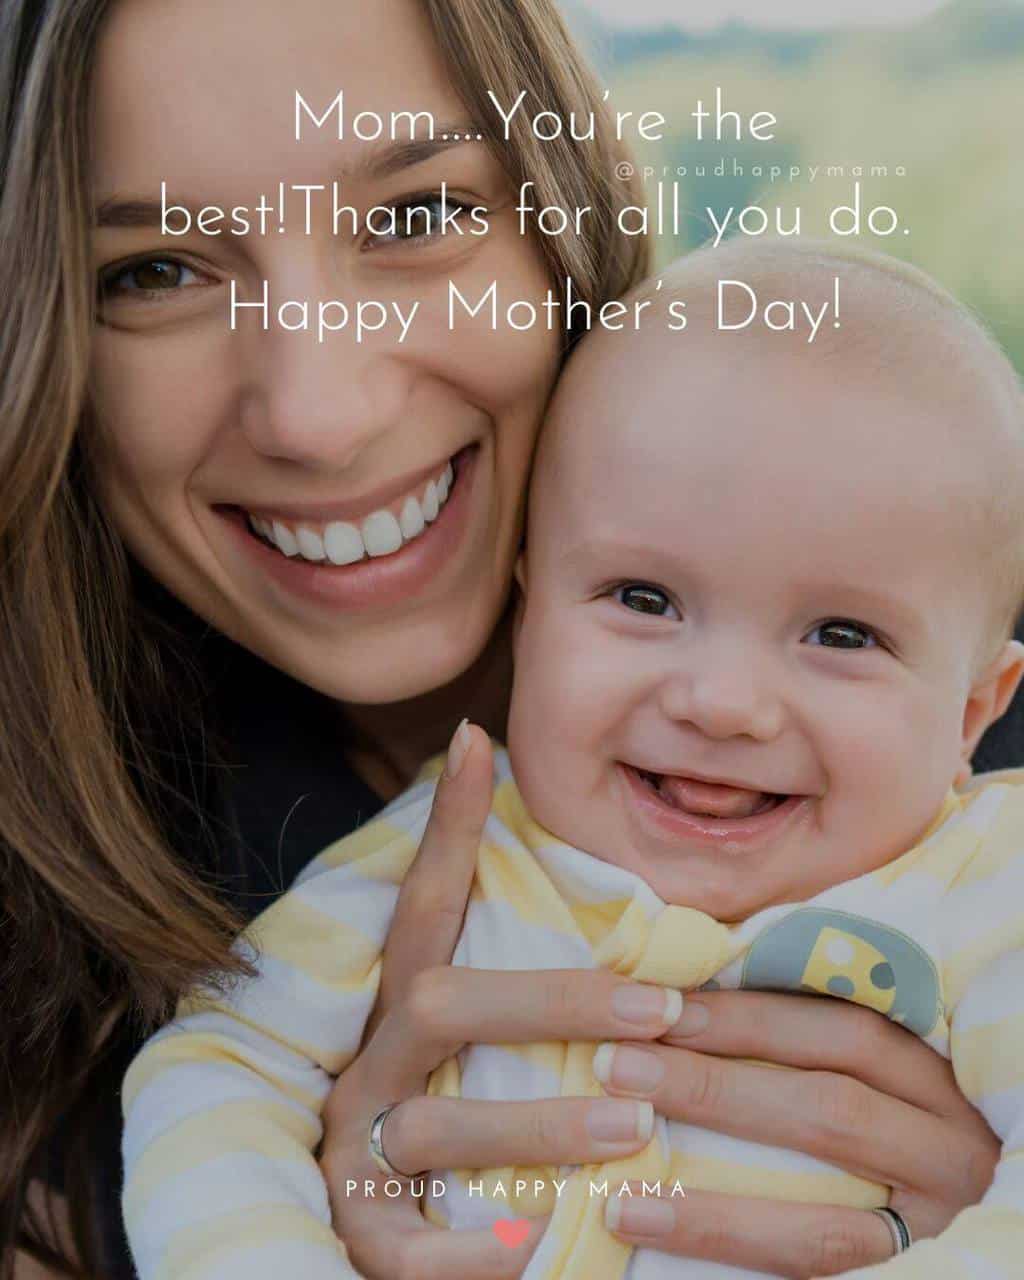 Mothers Day Poem From Son | Mom....You’re the best! Thanks for all you do. Happy Mother’s Day!